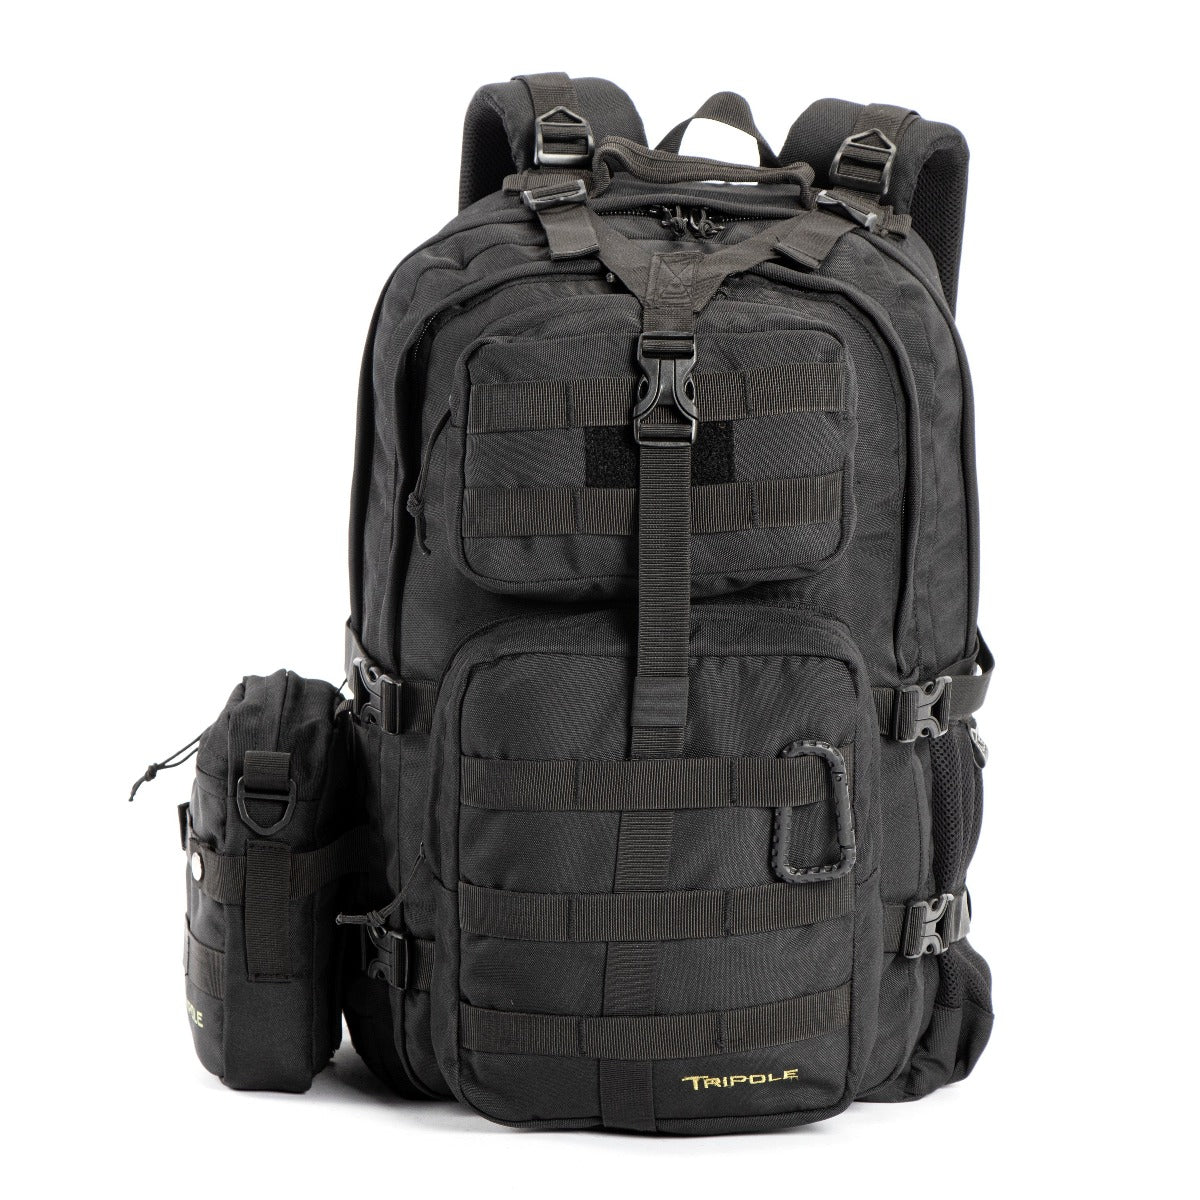 Tripole Alfa Military Tactical Backpack with Sling Bag Attachment -  46 Litres - Black 2